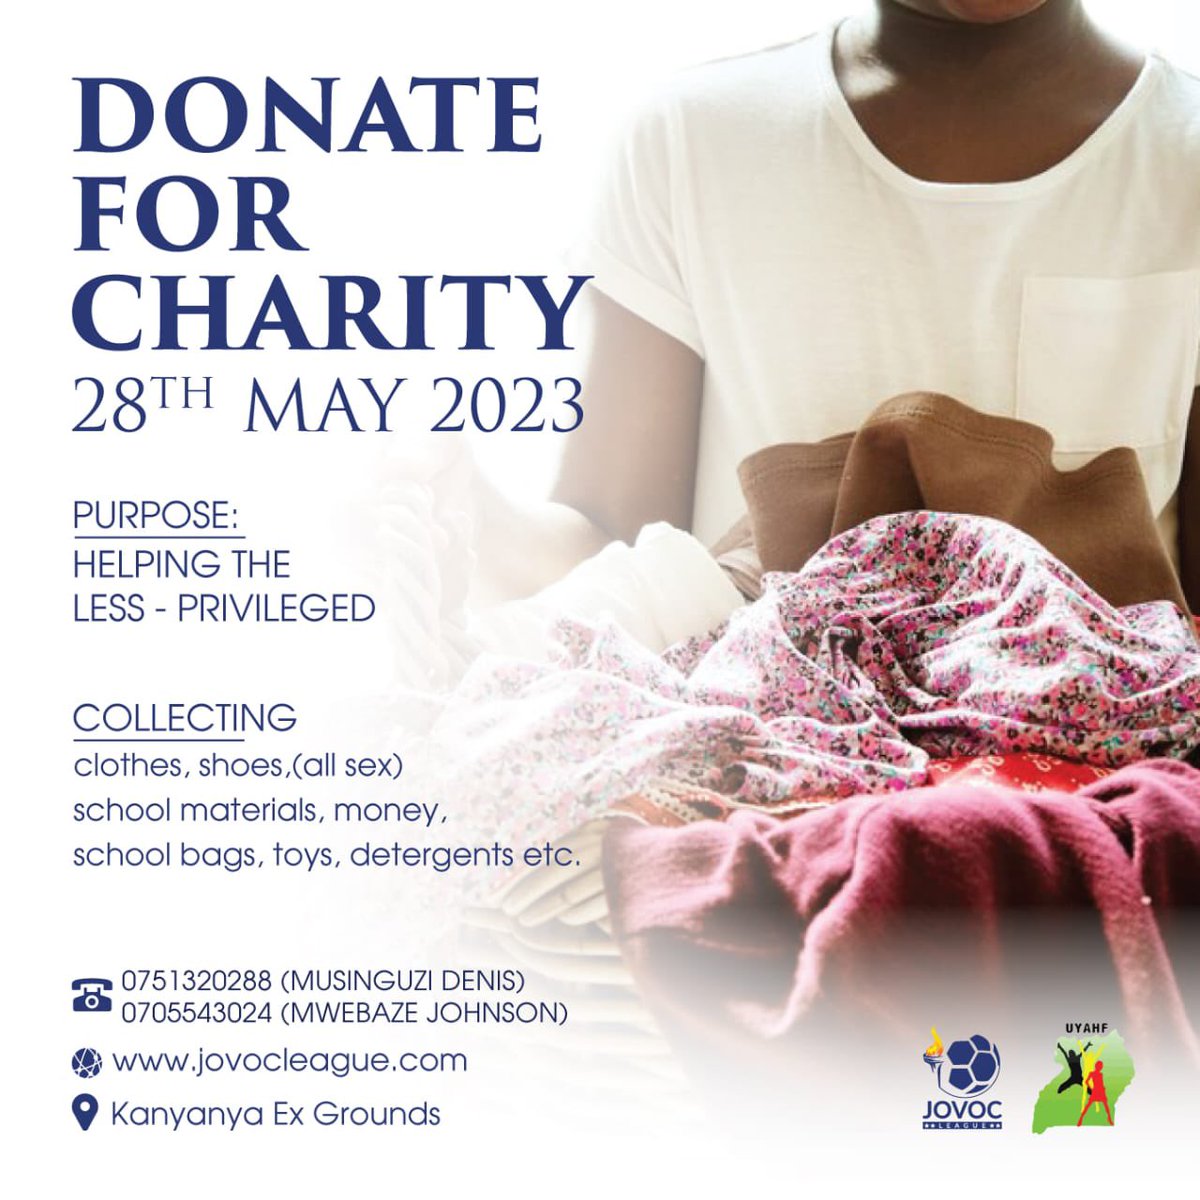 As Jovoc league had Promised, tomorrow bring all you can manage to donate to the less privileged. All kinds of stuff are welcome. 
#Jovocleague
#HembaGwake